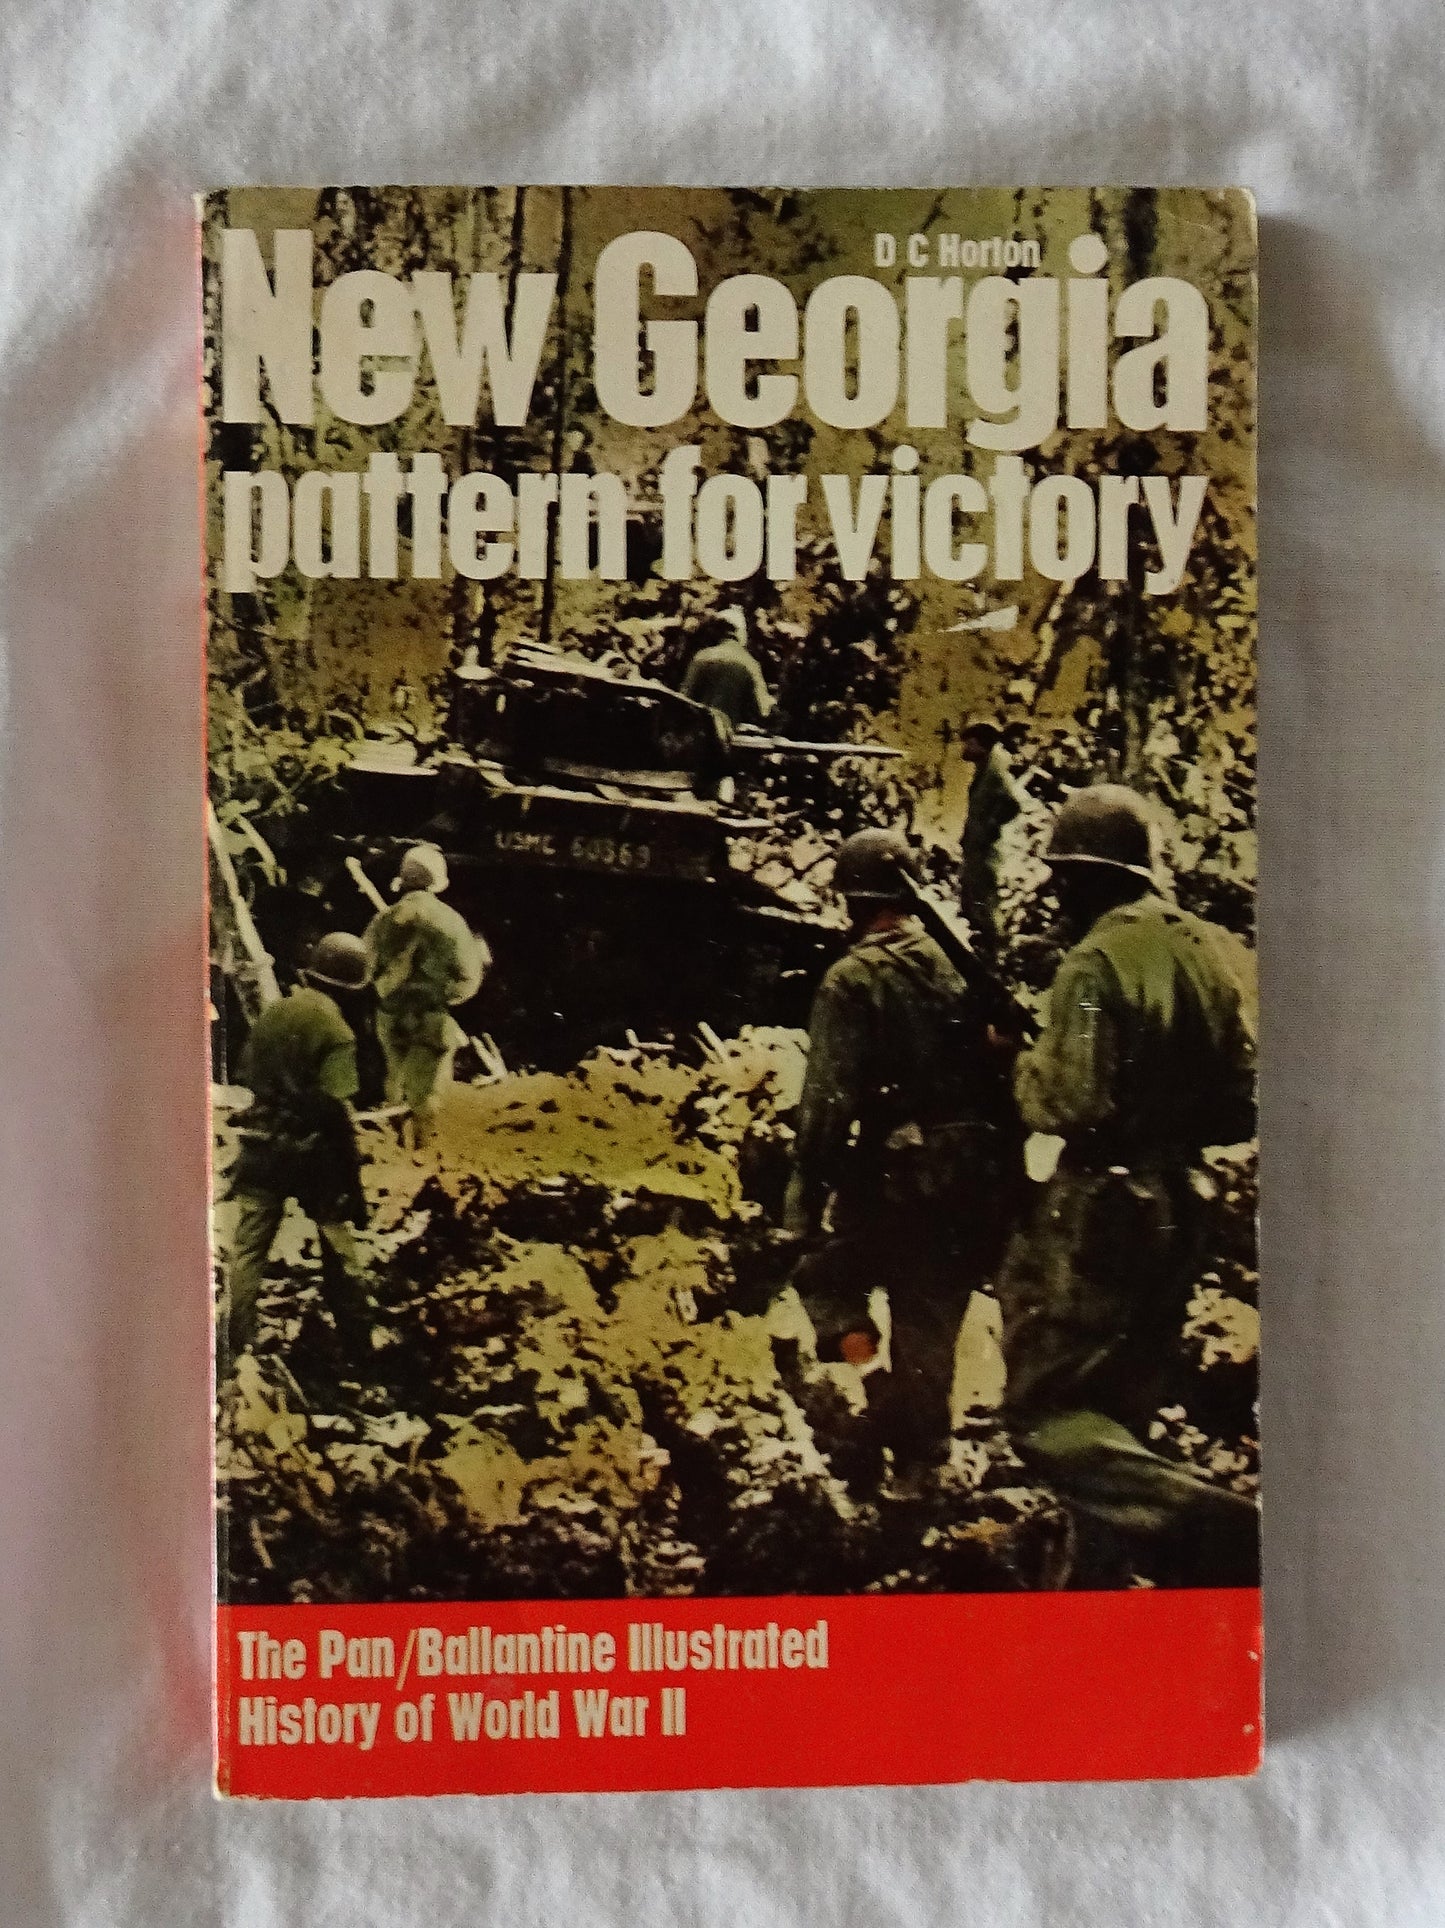 New Georgia Pattern for Victory by D. C. Horton